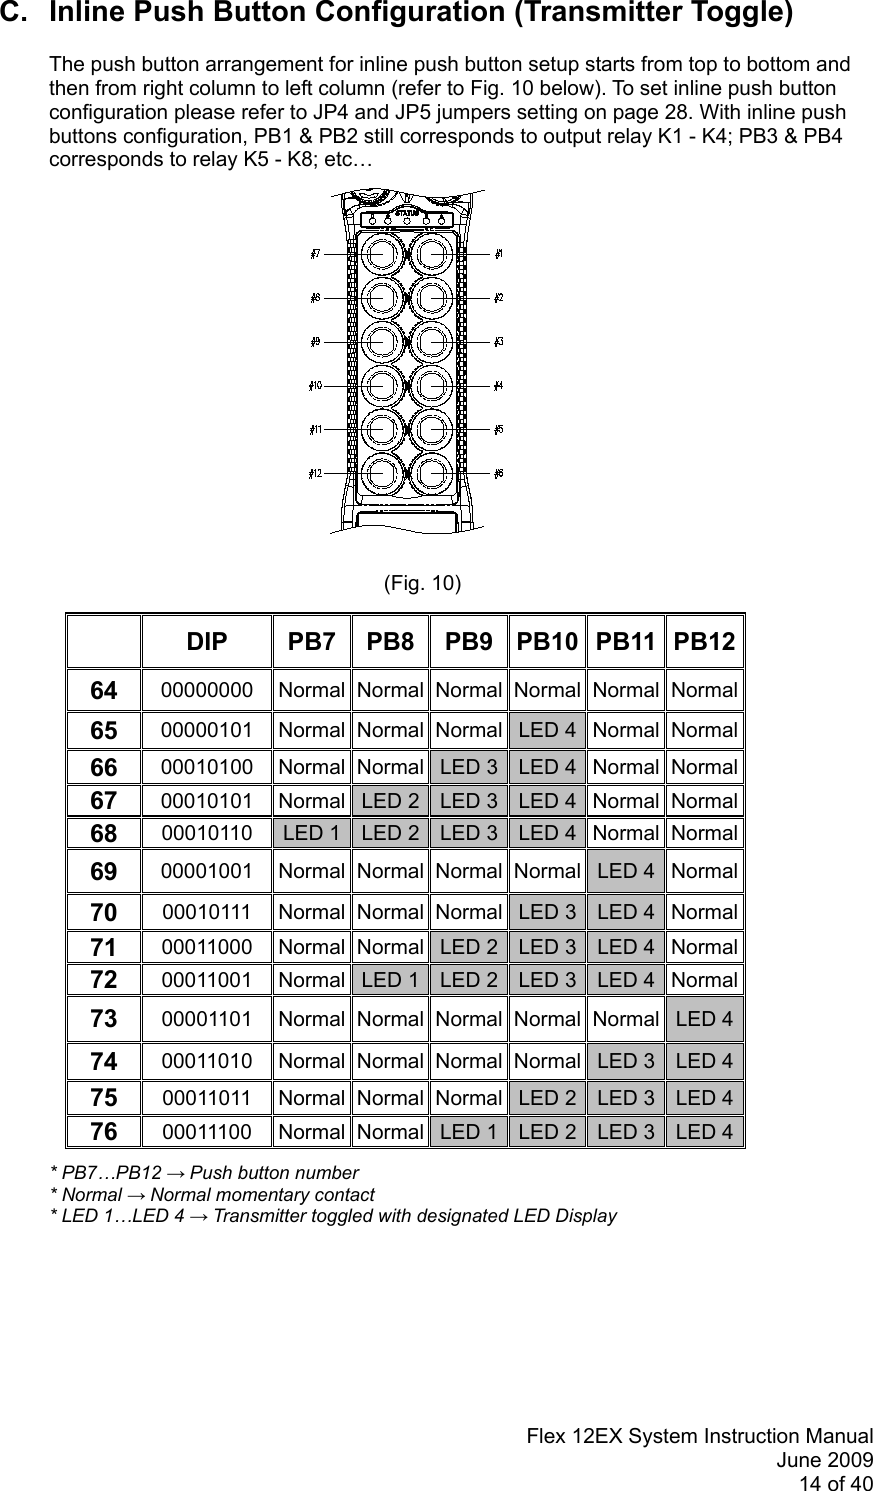 Flex 12EX System Instruction ManualJune 200914 of 40C. Inline Push Button Configuration (Transmitter Toggle)The push button arrangement for inline push button setup starts from top to bottom andthen from right column to left column (refer to Fig. 10 below). To set inline push buttonconfiguration please refer to JP4 and JP5 jumpers setting on page 28. With inline pushbuttons configuration, PB1 &amp; PB2 still corresponds to output relay K1 - K4; PB3 &amp; PB4corresponds to relay K5 - K8; etc…(Fig. 10)DIP PB7 PB8 PB9 PB10 PB11 PB1264 00000000 Normal Normal Normal Normal Normal Normal65 00000101 Normal Normal Normal LED 4 Normal Normal66 00010100 Normal Normal LED 3 LED 4 Normal Normal67 00010101 Normal LED 2 LED 3 LED 4 Normal Normal68 00010110 LED 1 LED 2 LED 3 LED 4 Normal Normal69 00001001 Normal Normal Normal Normal LED 4 Normal70 00010111 Normal Normal Normal LED 3 LED 4 Normal71 00011000 Normal Normal LED 2 LED 3 LED 4 Normal72 00011001 Normal LED 1 LED 2 LED 3 LED 4 Normal73 00001101 Normal Normal Normal Normal Normal LED 474 00011010 Normal Normal Normal Normal LED 3 LED 475 00011011 Normal Normal Normal LED 2 LED 3 LED 476 00011100 Normal Normal LED 1 LED 2 LED 3 LED 4* PB7…PB12 → Push button number* Normal → Normal momentary contact* LED 1…LED 4 → Transmitter toggled with designated LED Display